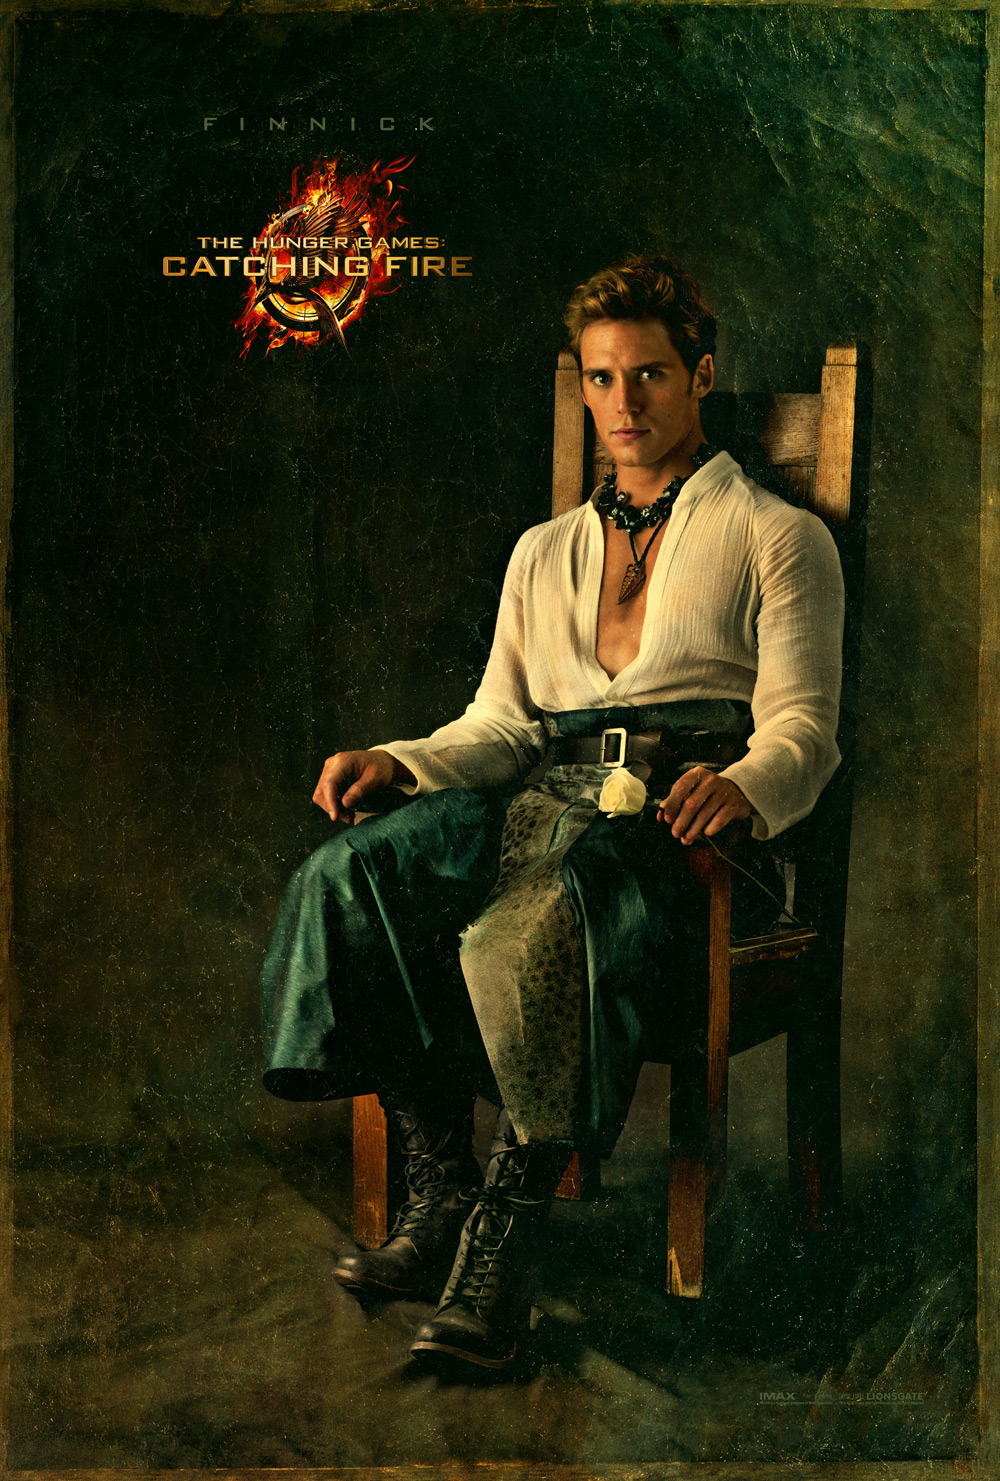 finnick-catching-fire-victory poster